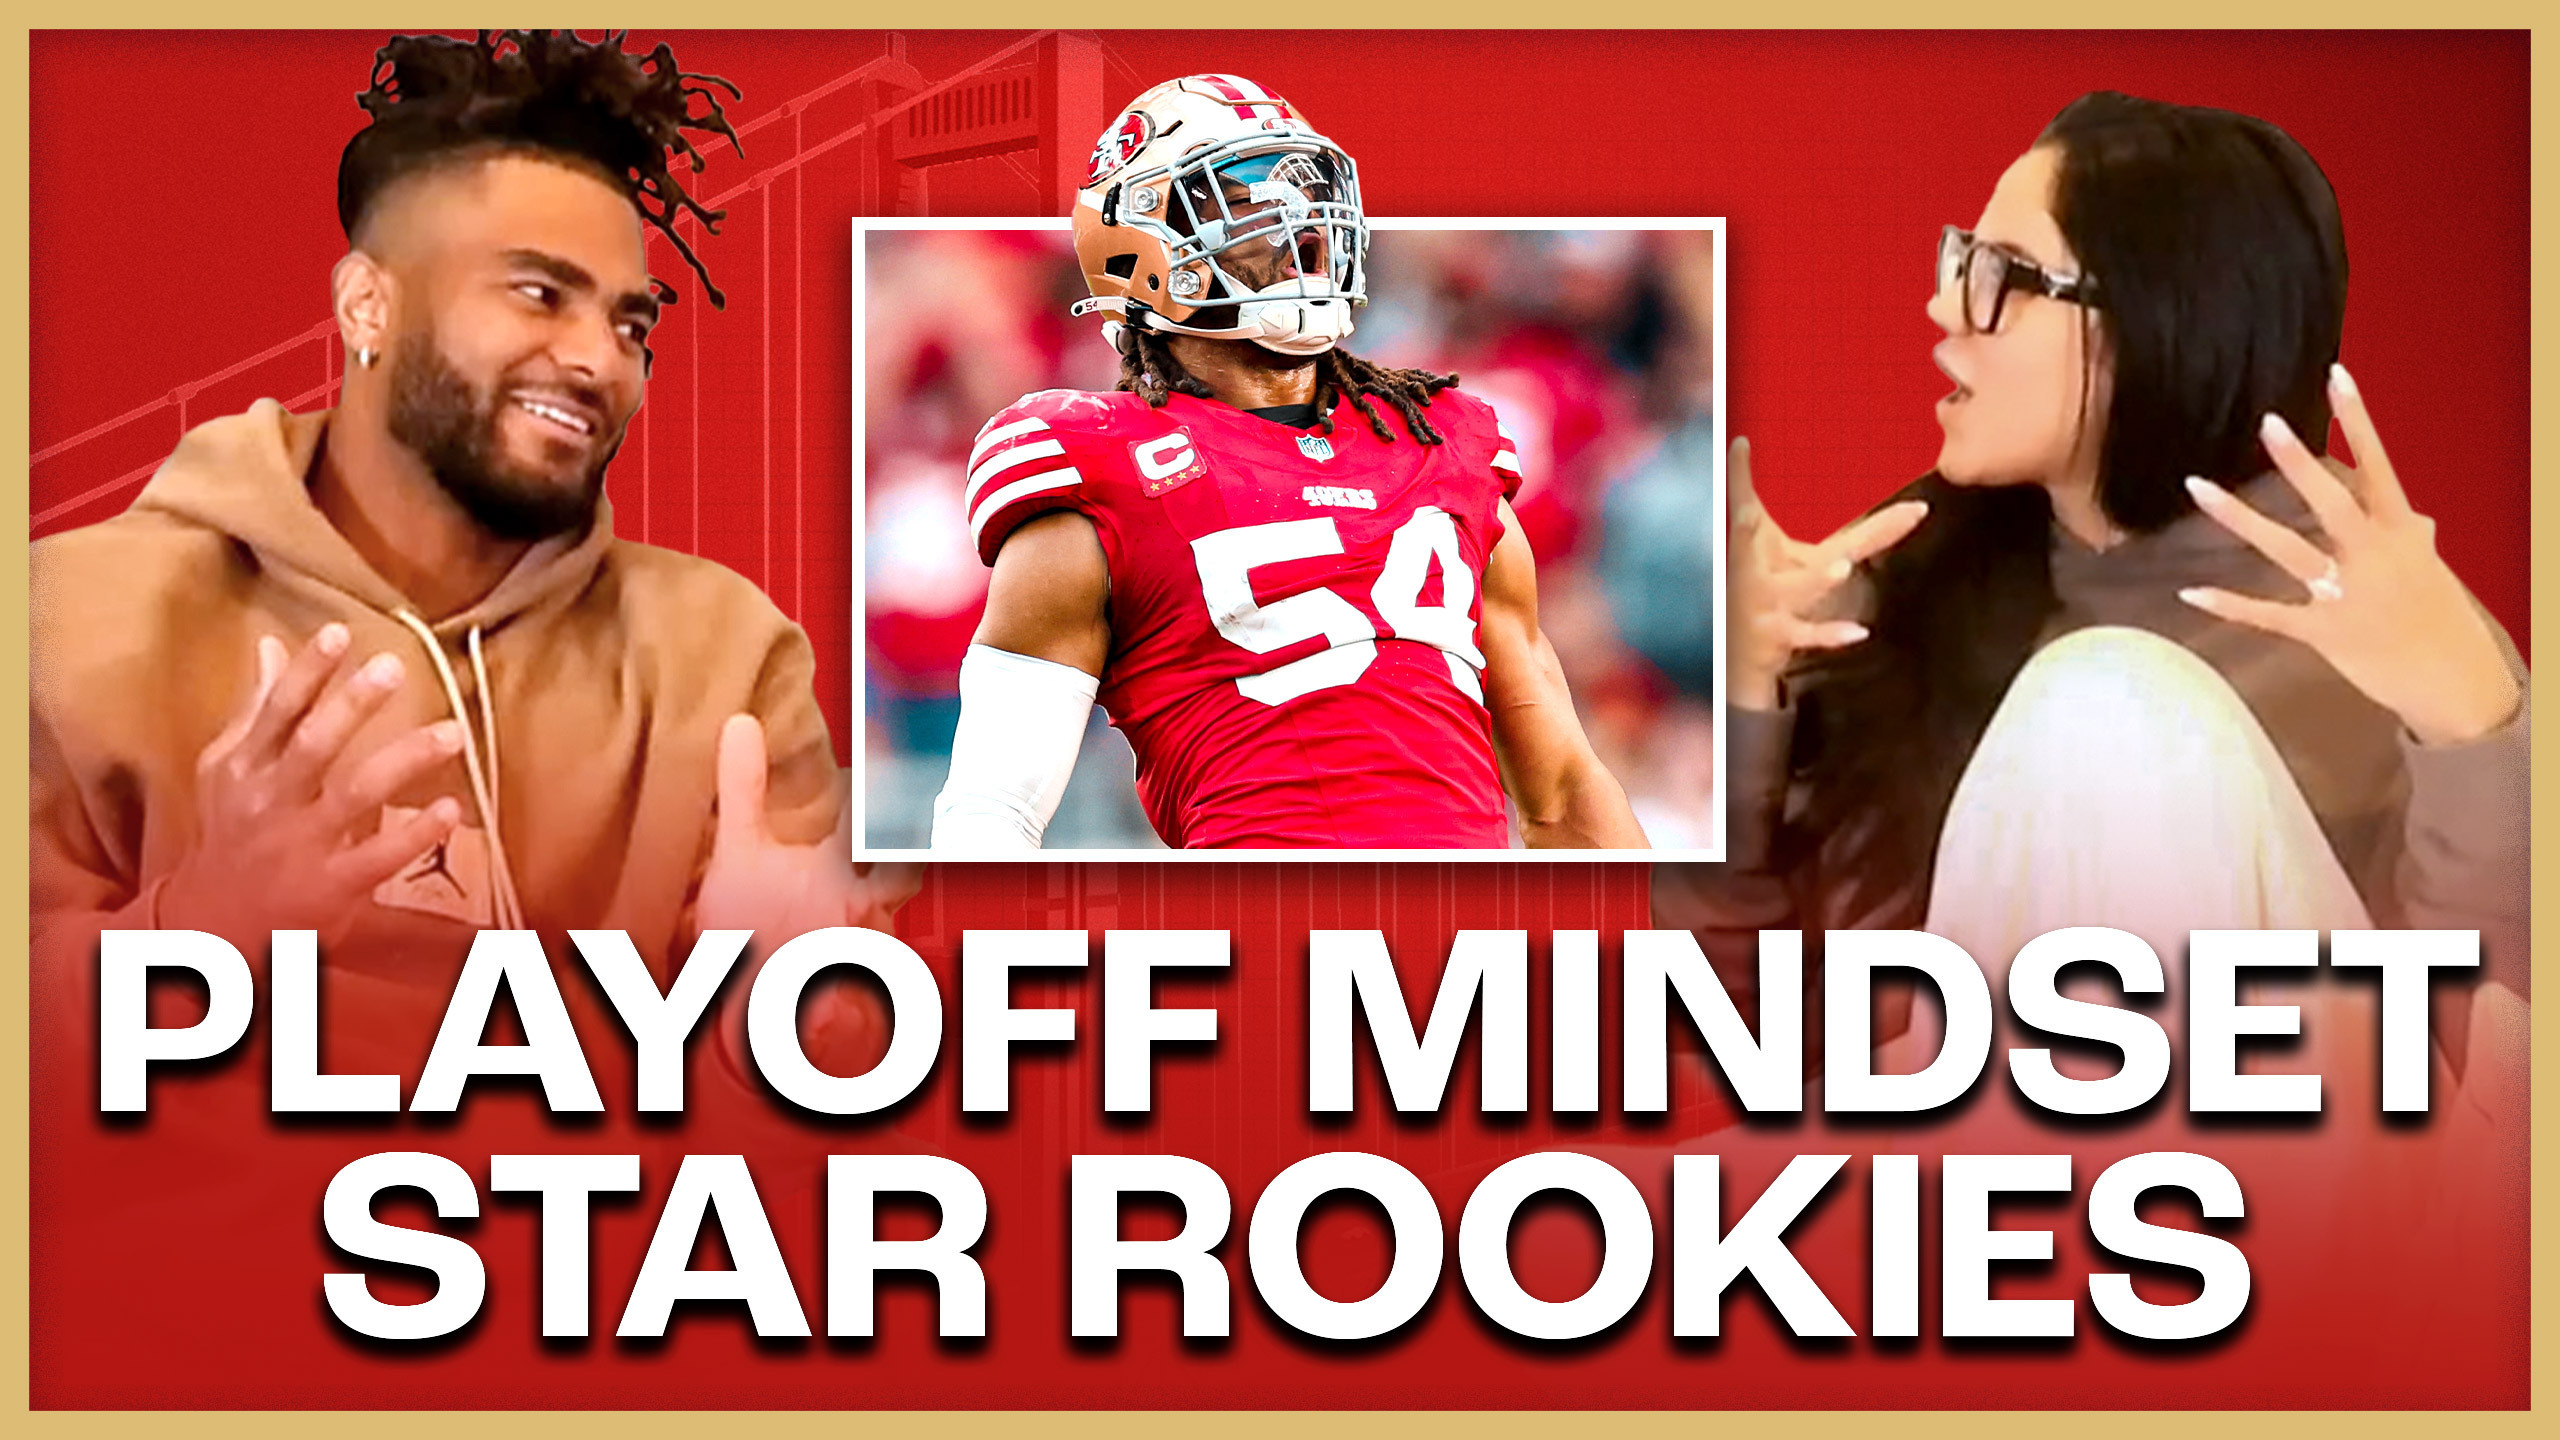 Warner House screenshot with Fred and Sydney Warner and text "playoff mindset; star rookies"